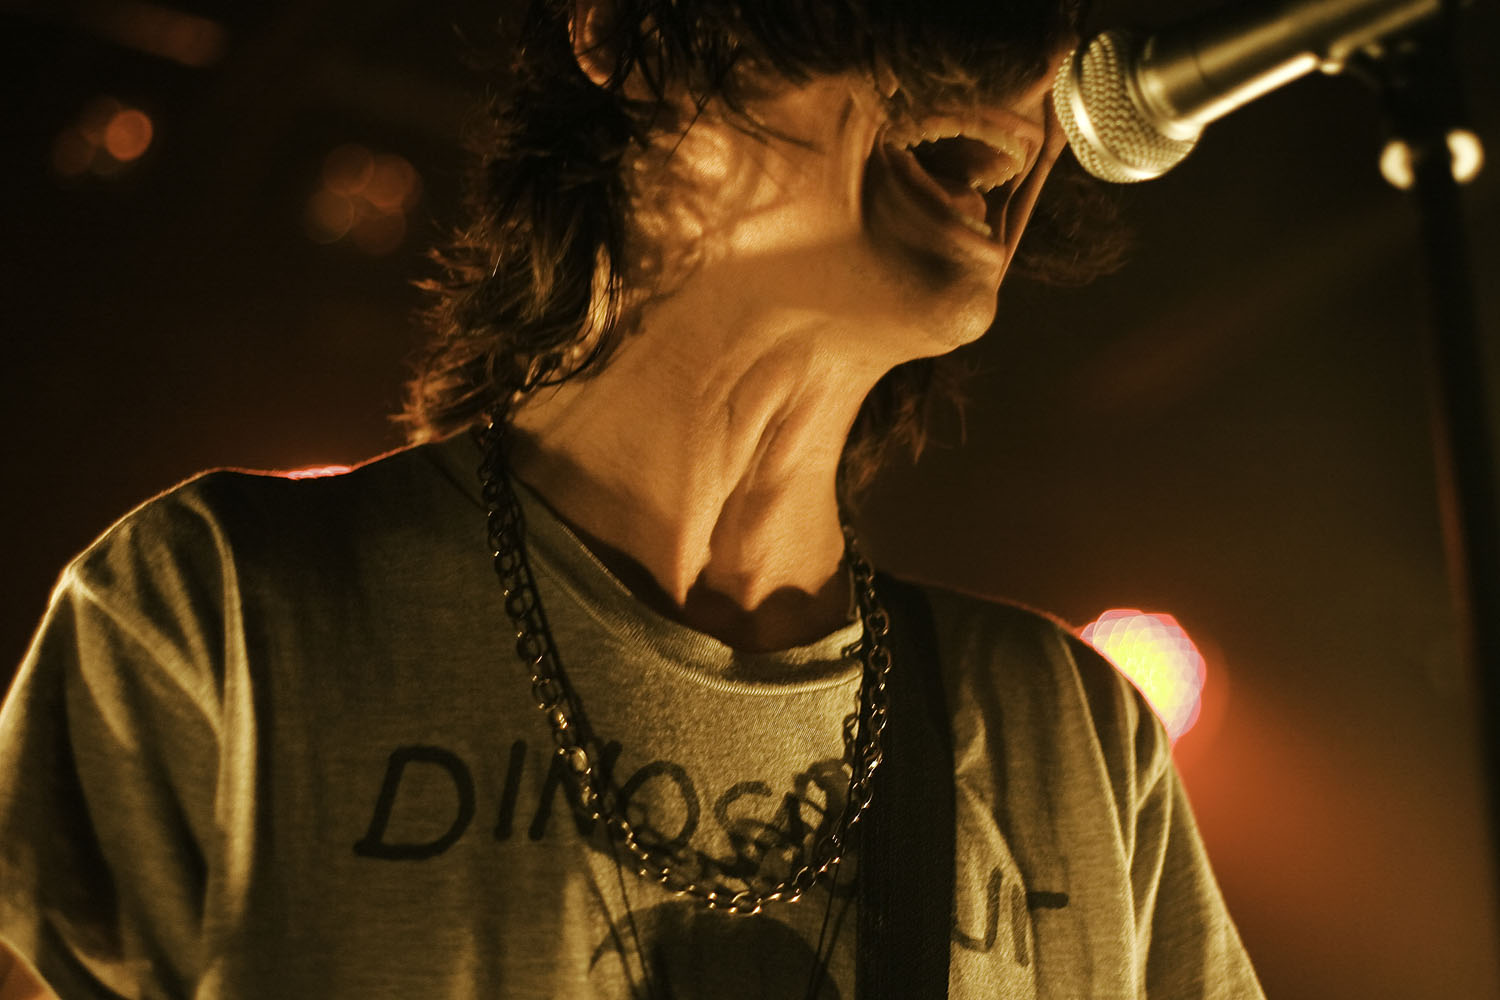  Singer and guitarist Hardy Morris of the band Dead Confederate roars into a microphone during a concert at the Firebird in St. Louis, Missouri. The band's energy was underscored by heavy use of a fog machine and stage-level lights. 